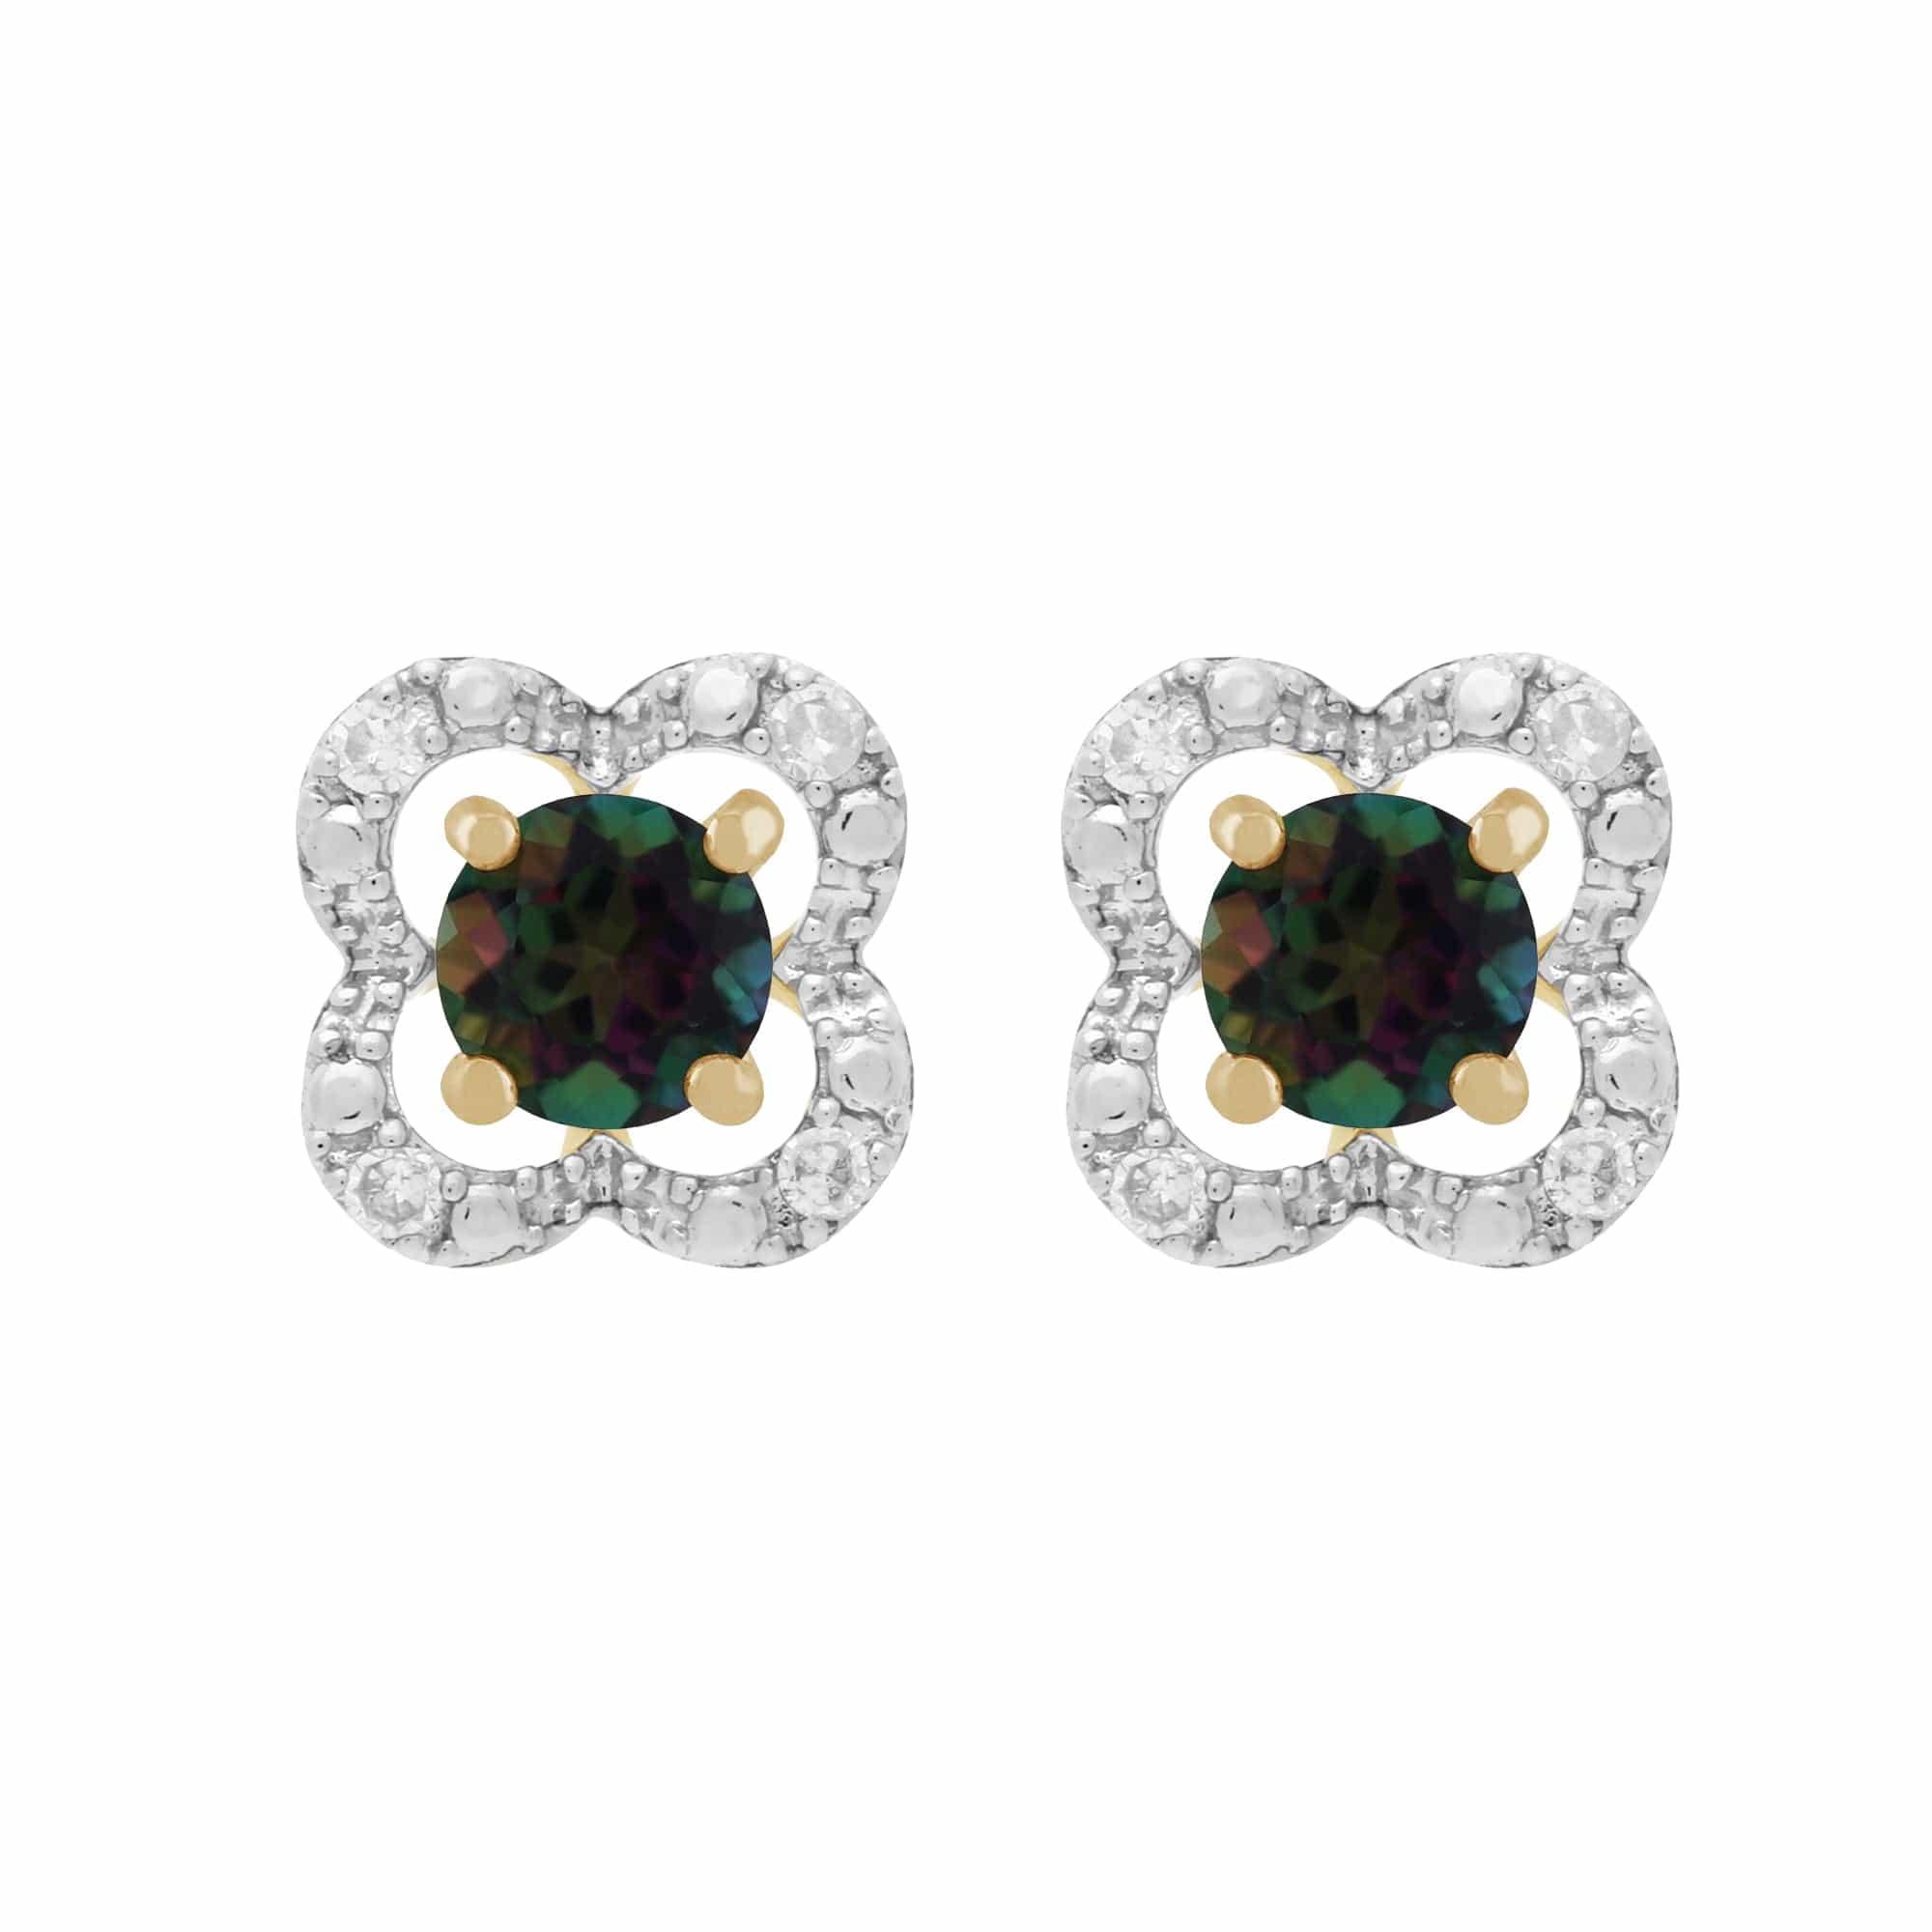 22523-191E0375019 Classic Round Mystic Topaz Studs with Detachable Diamond Floral Ear Jacket in 9ct Yellow Gold 1